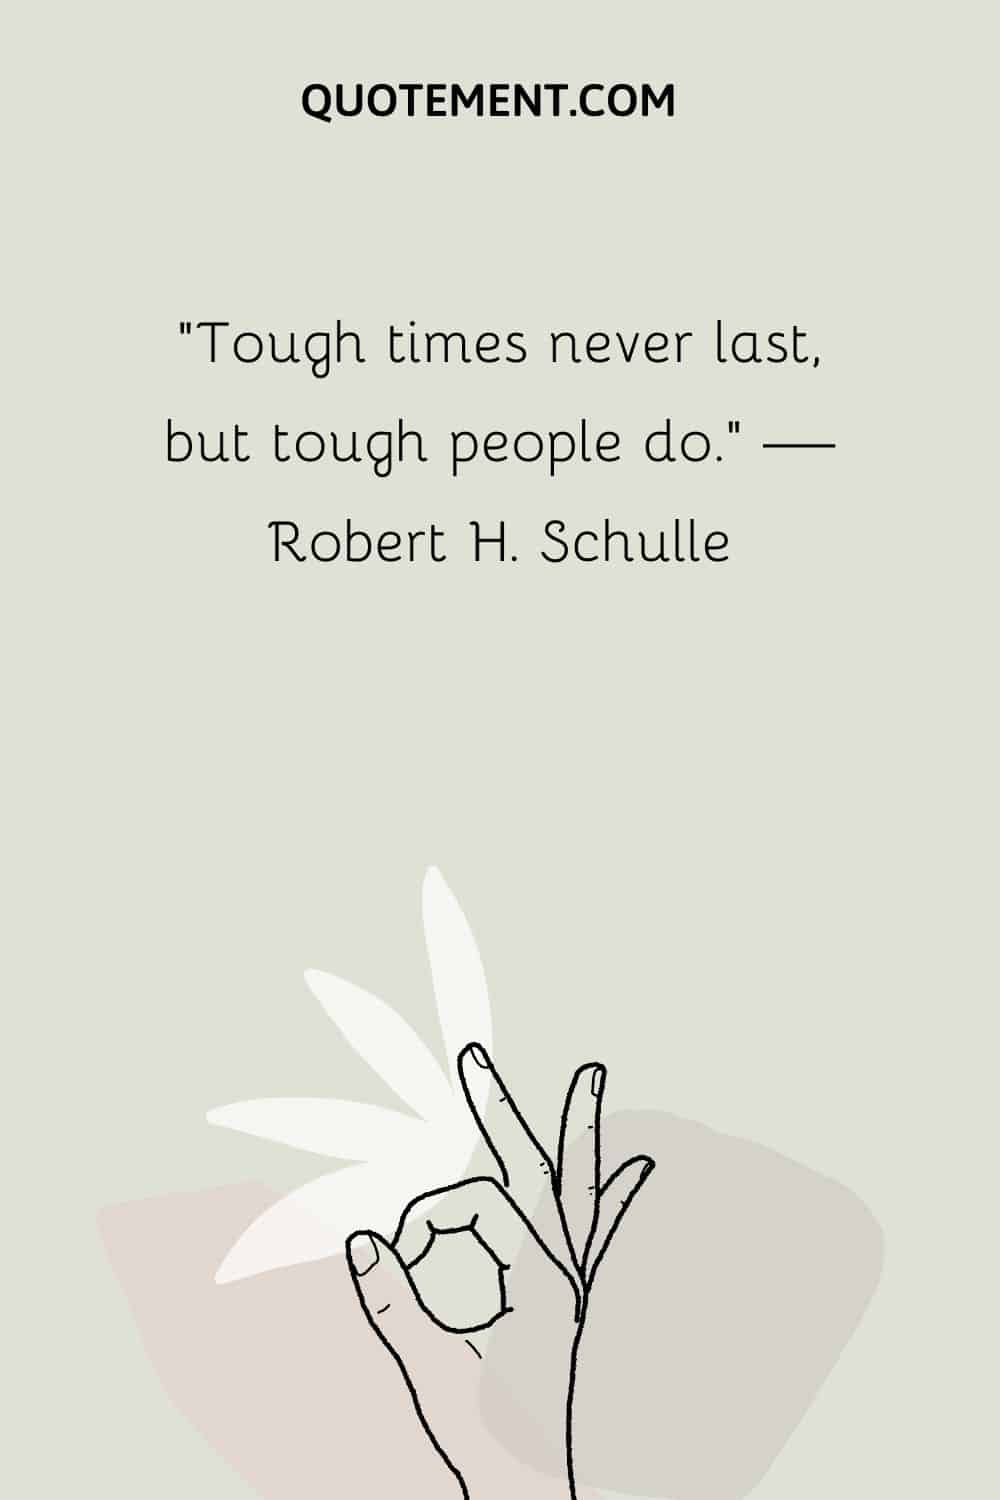 “Tough times never last, but tough people do.” — Robert H. Schulle